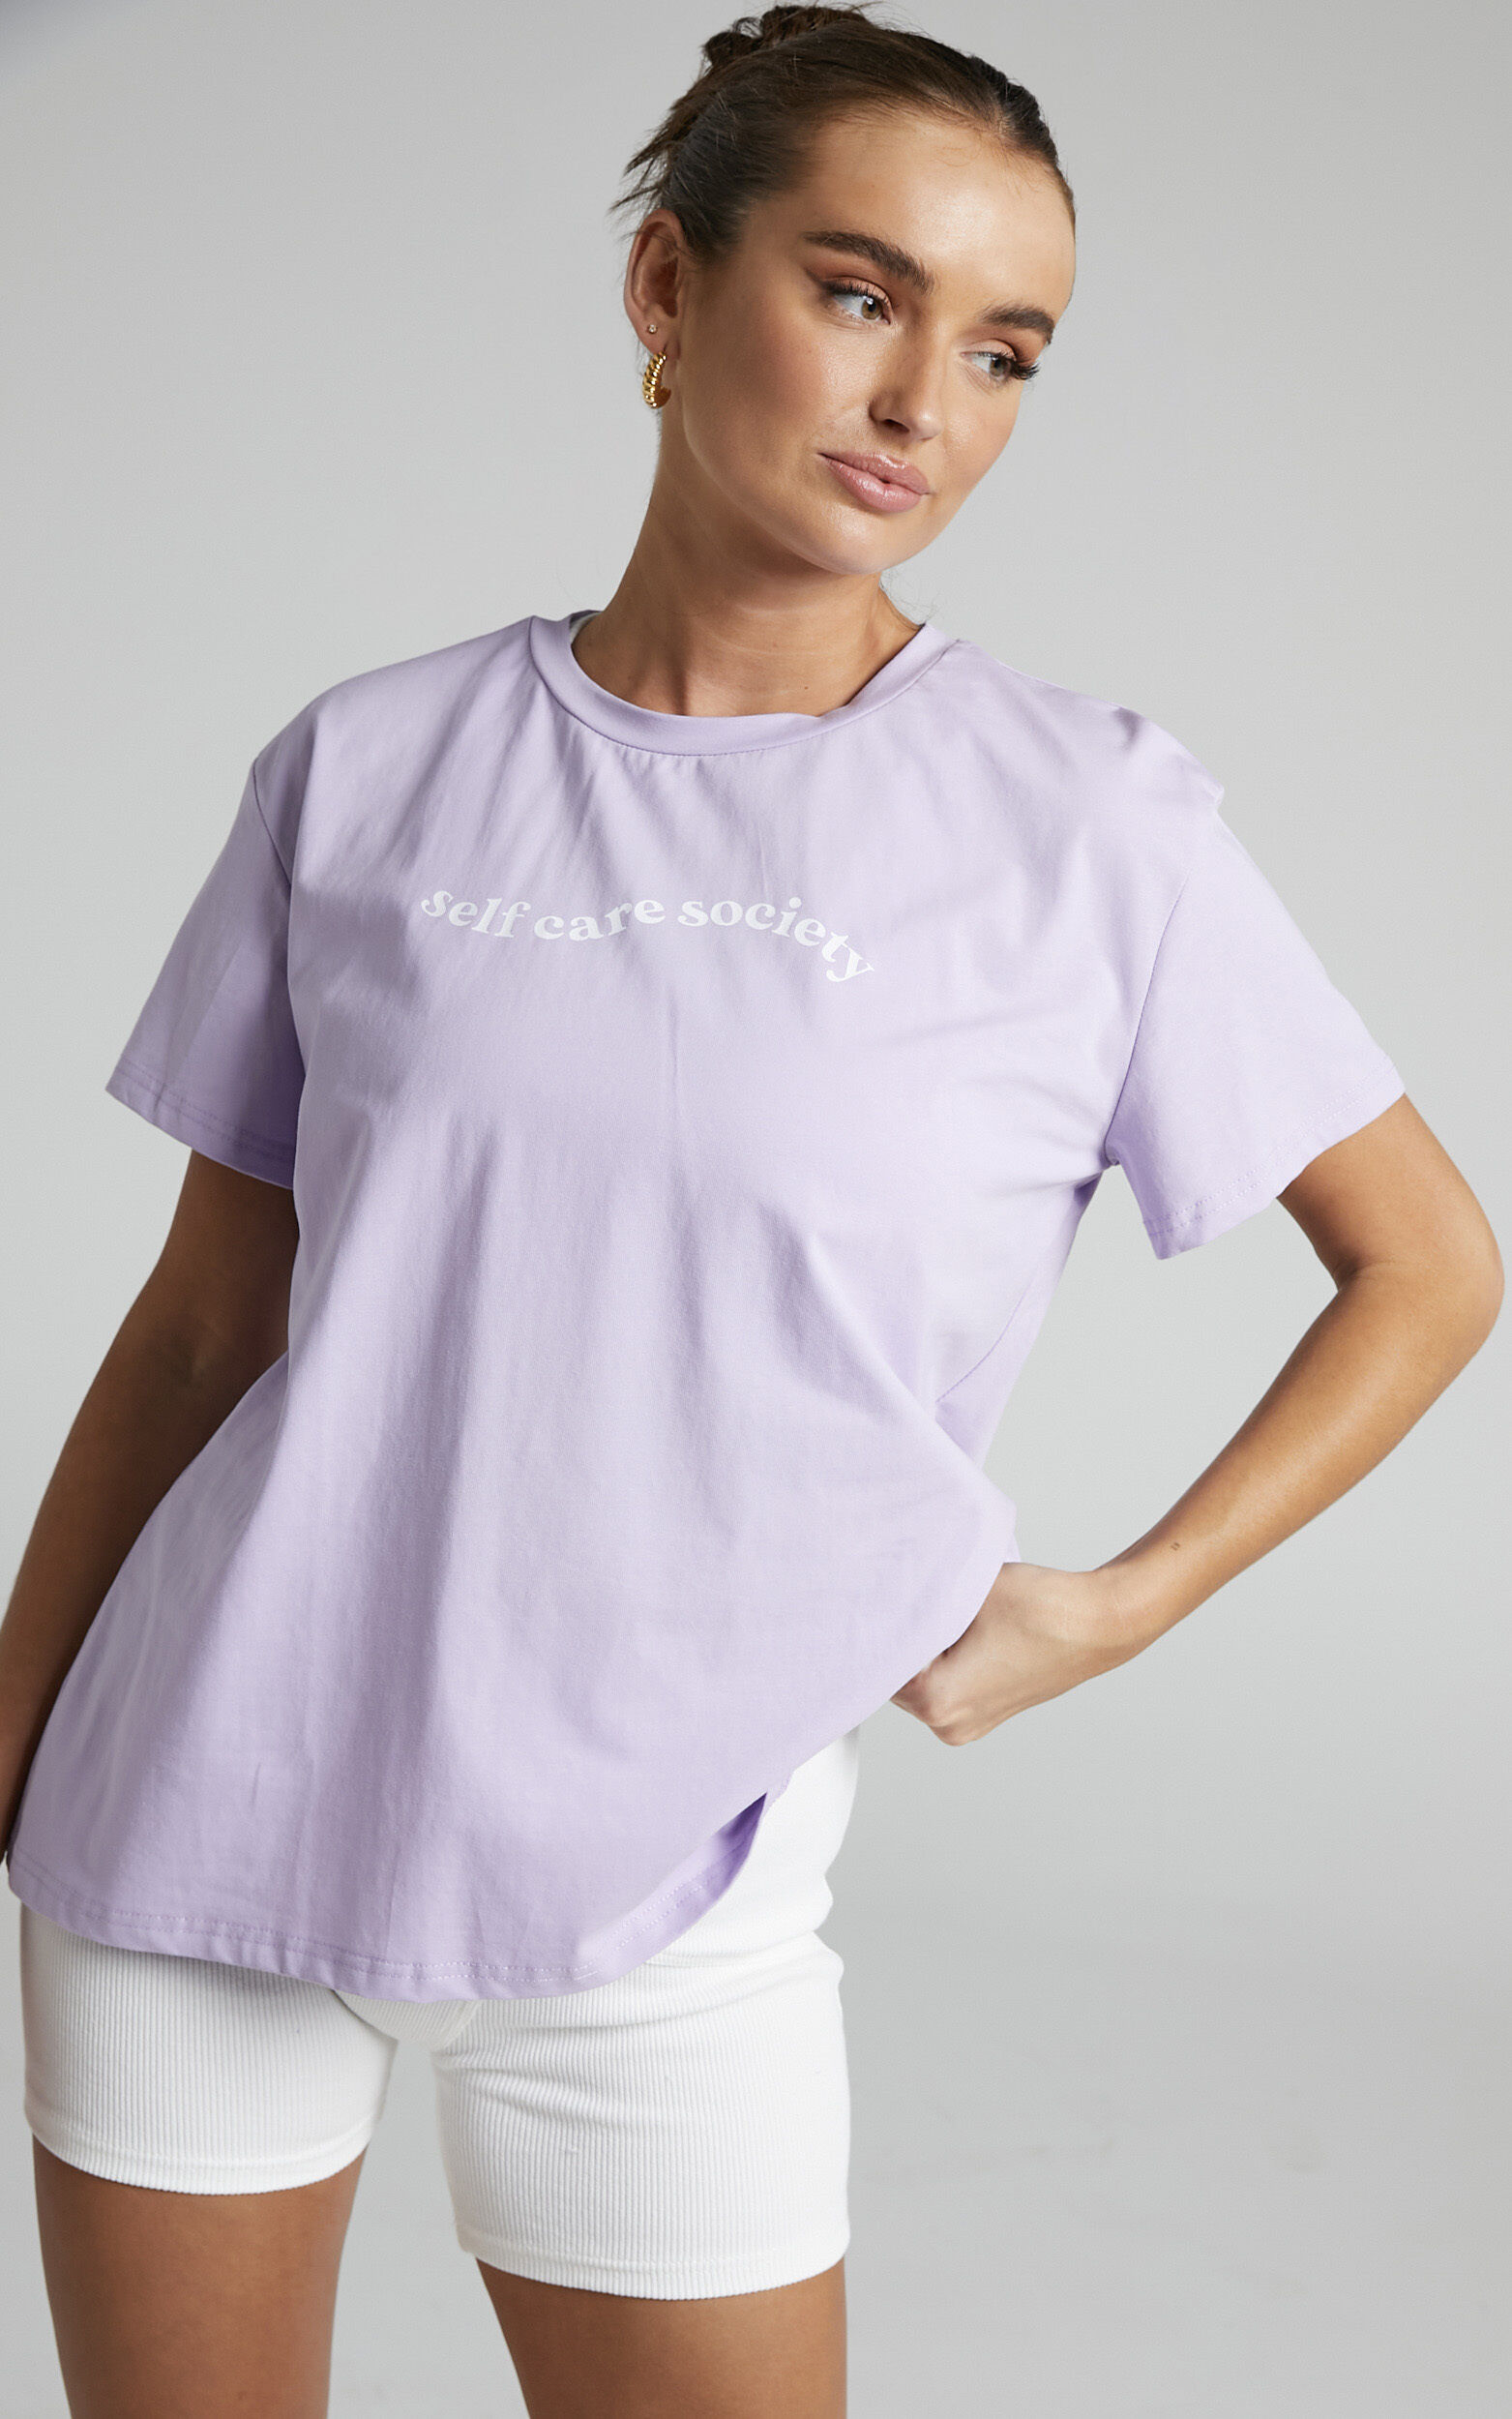 Sunday Society Club - Self Care Society T Shirt in Lilac - 04, PRP2